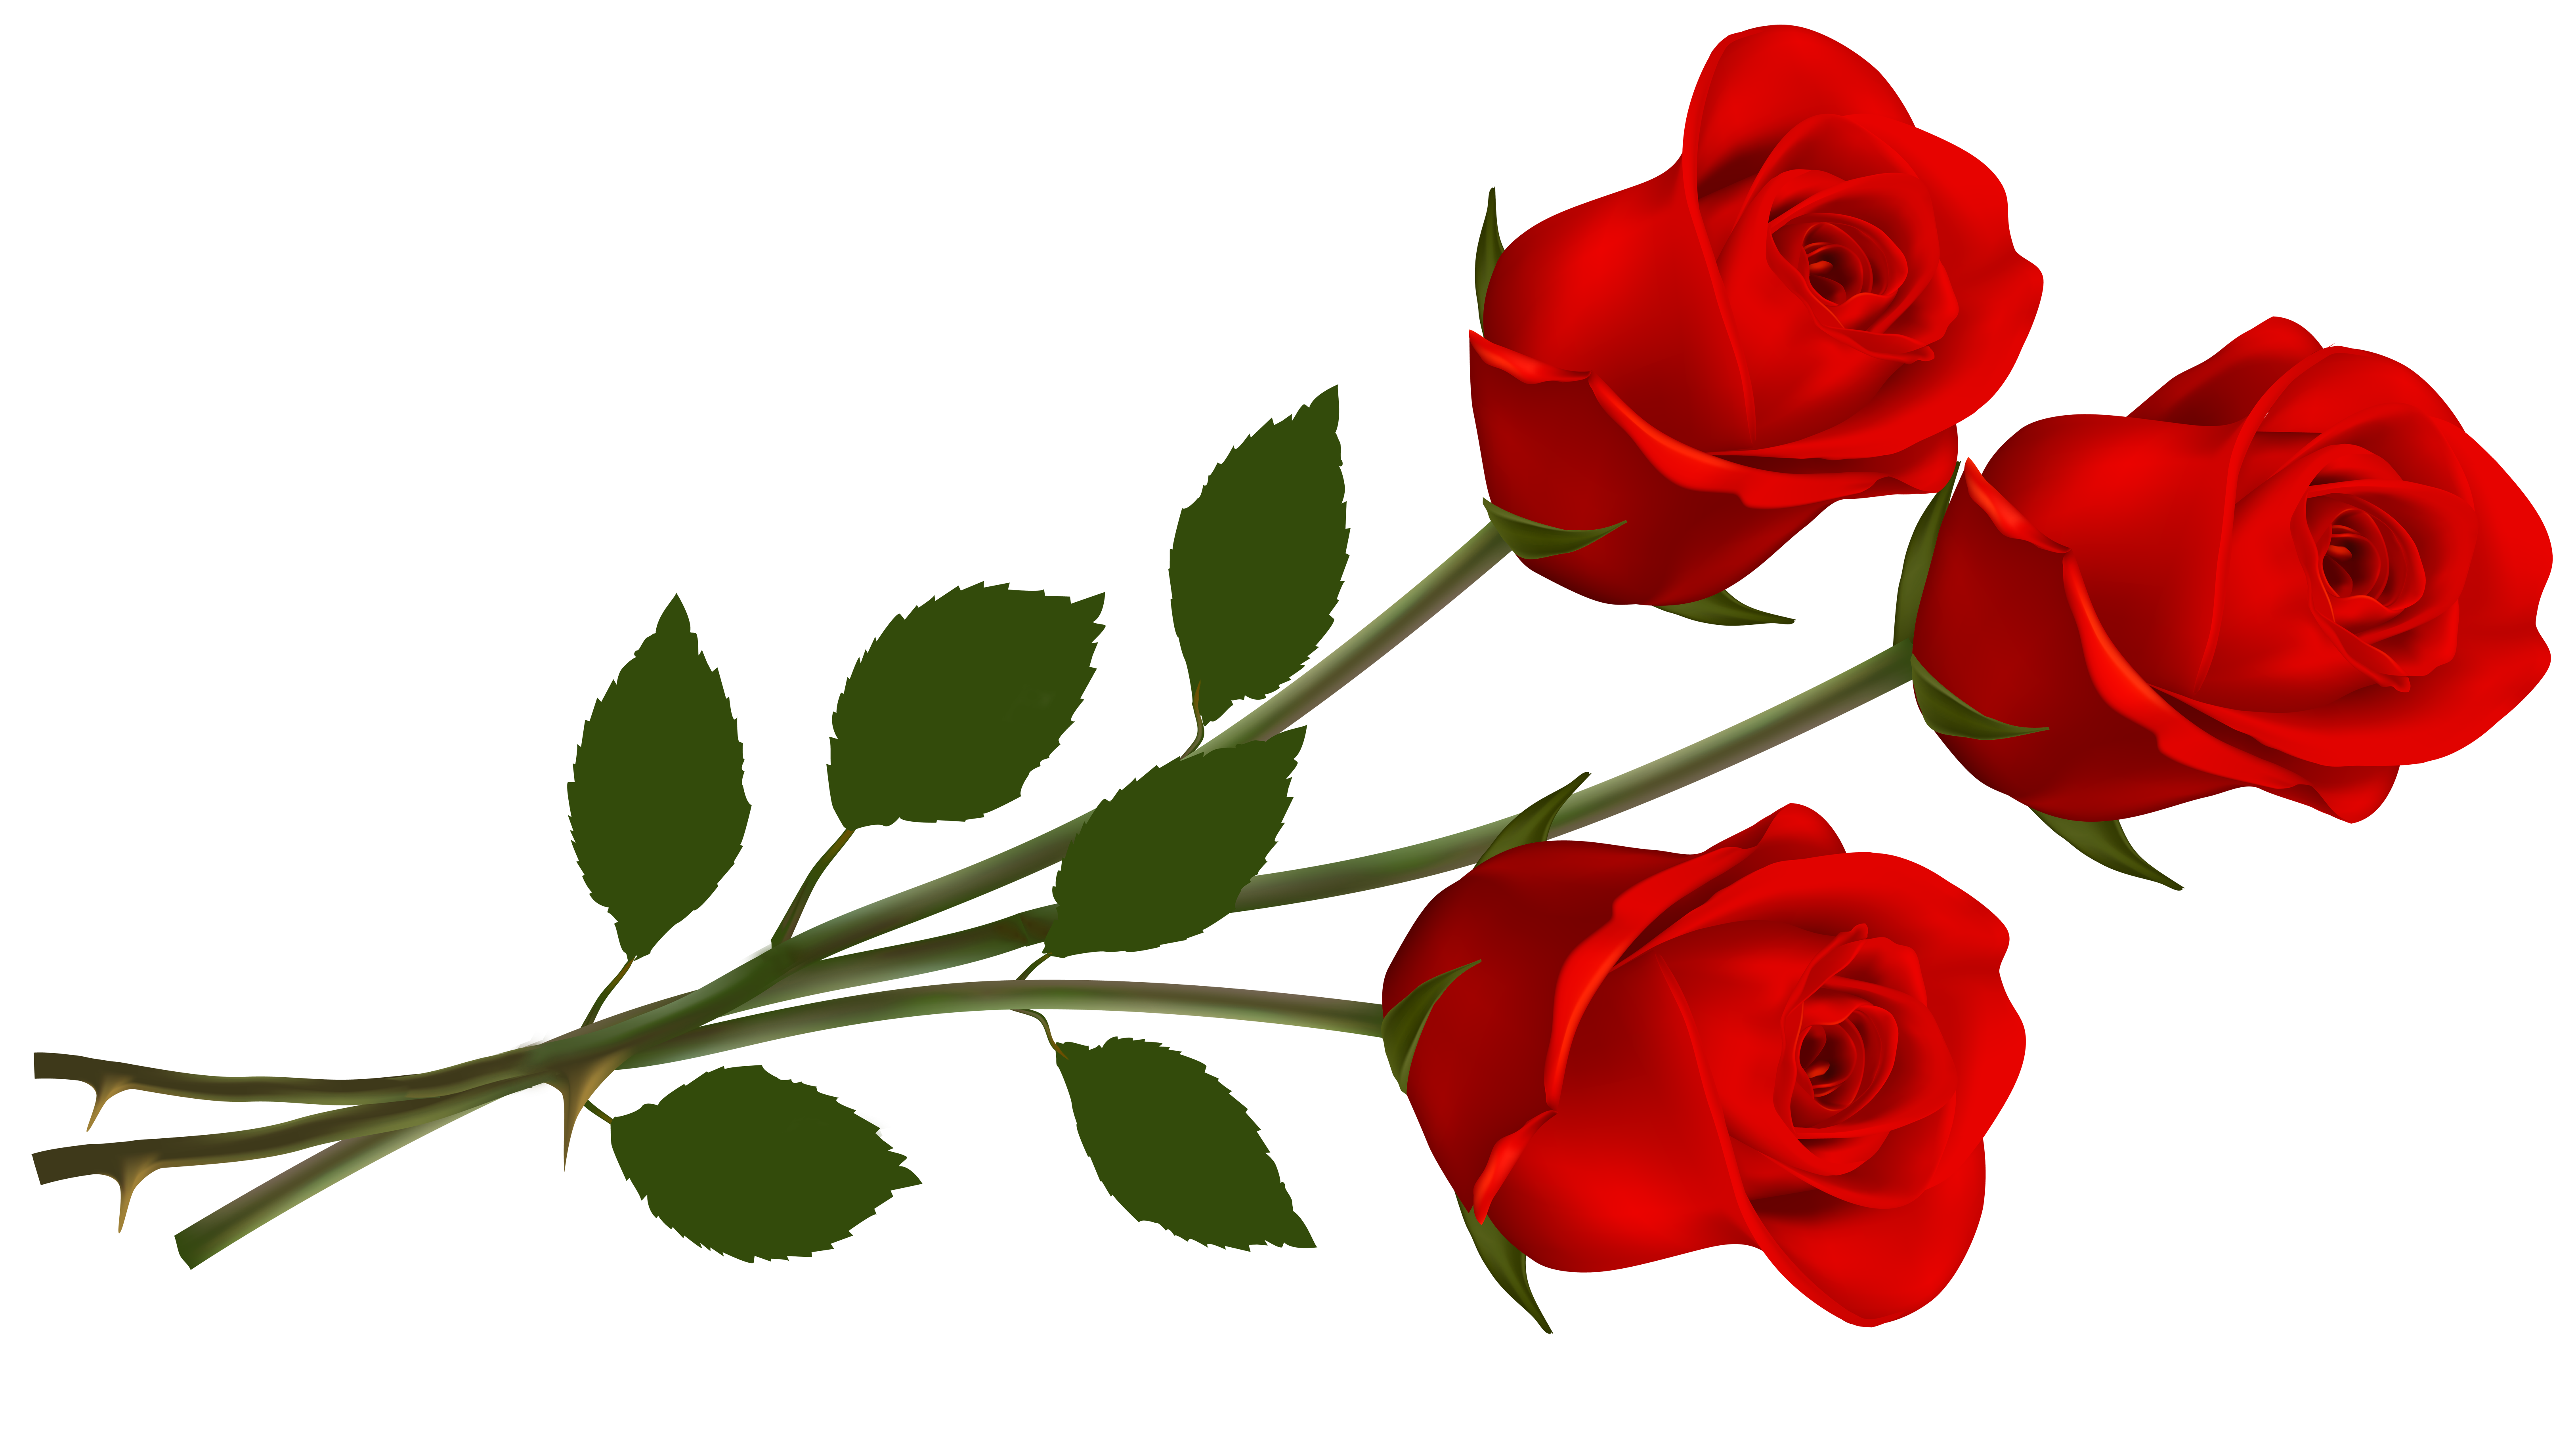 Single red rose clipart - ClipartFest